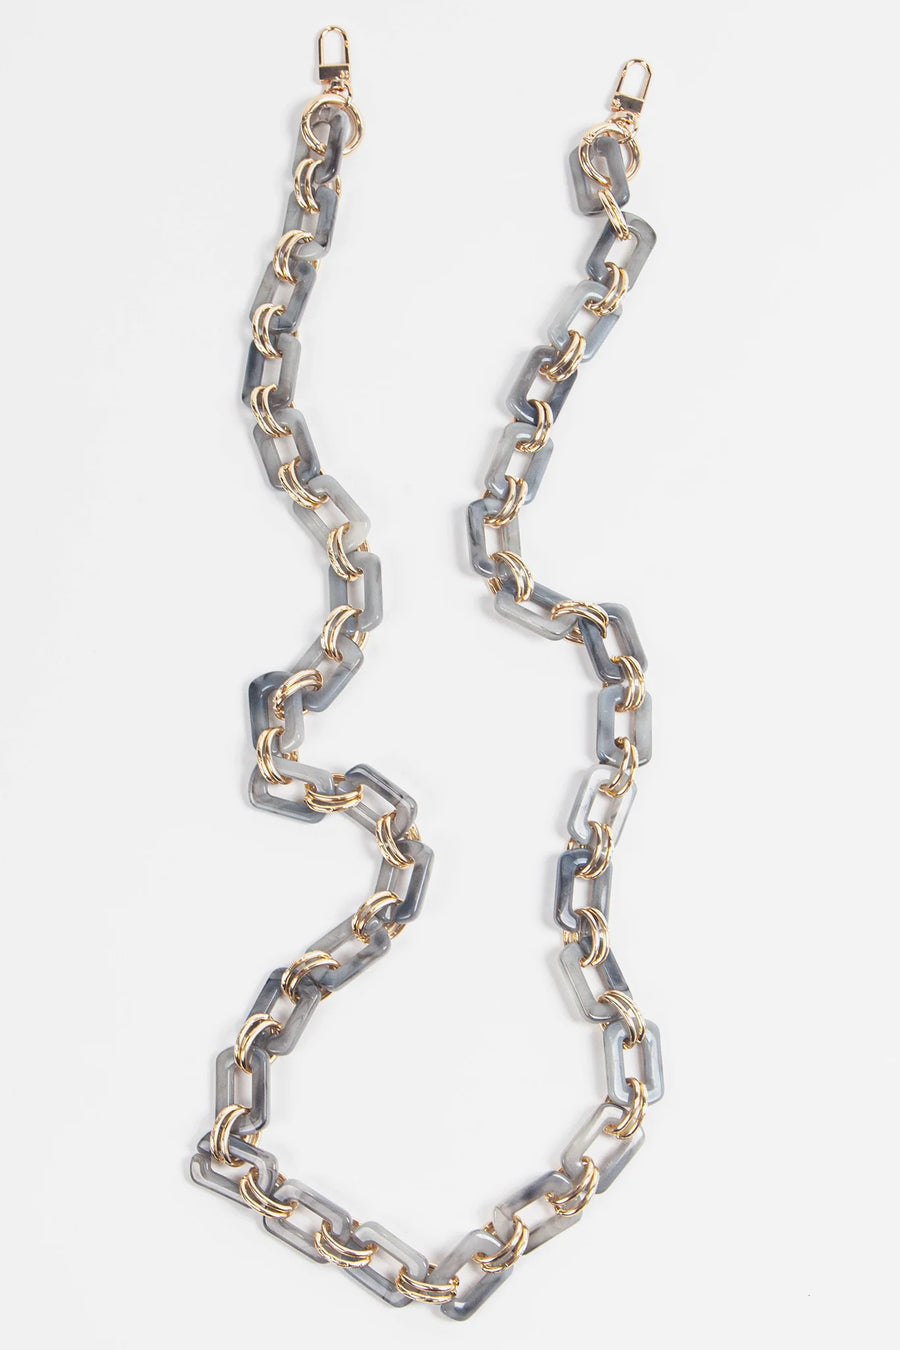 SQUARE LINK ACRYLIC BAG STRAP WITH ADDITIONAL GOLD LINKS | GREY